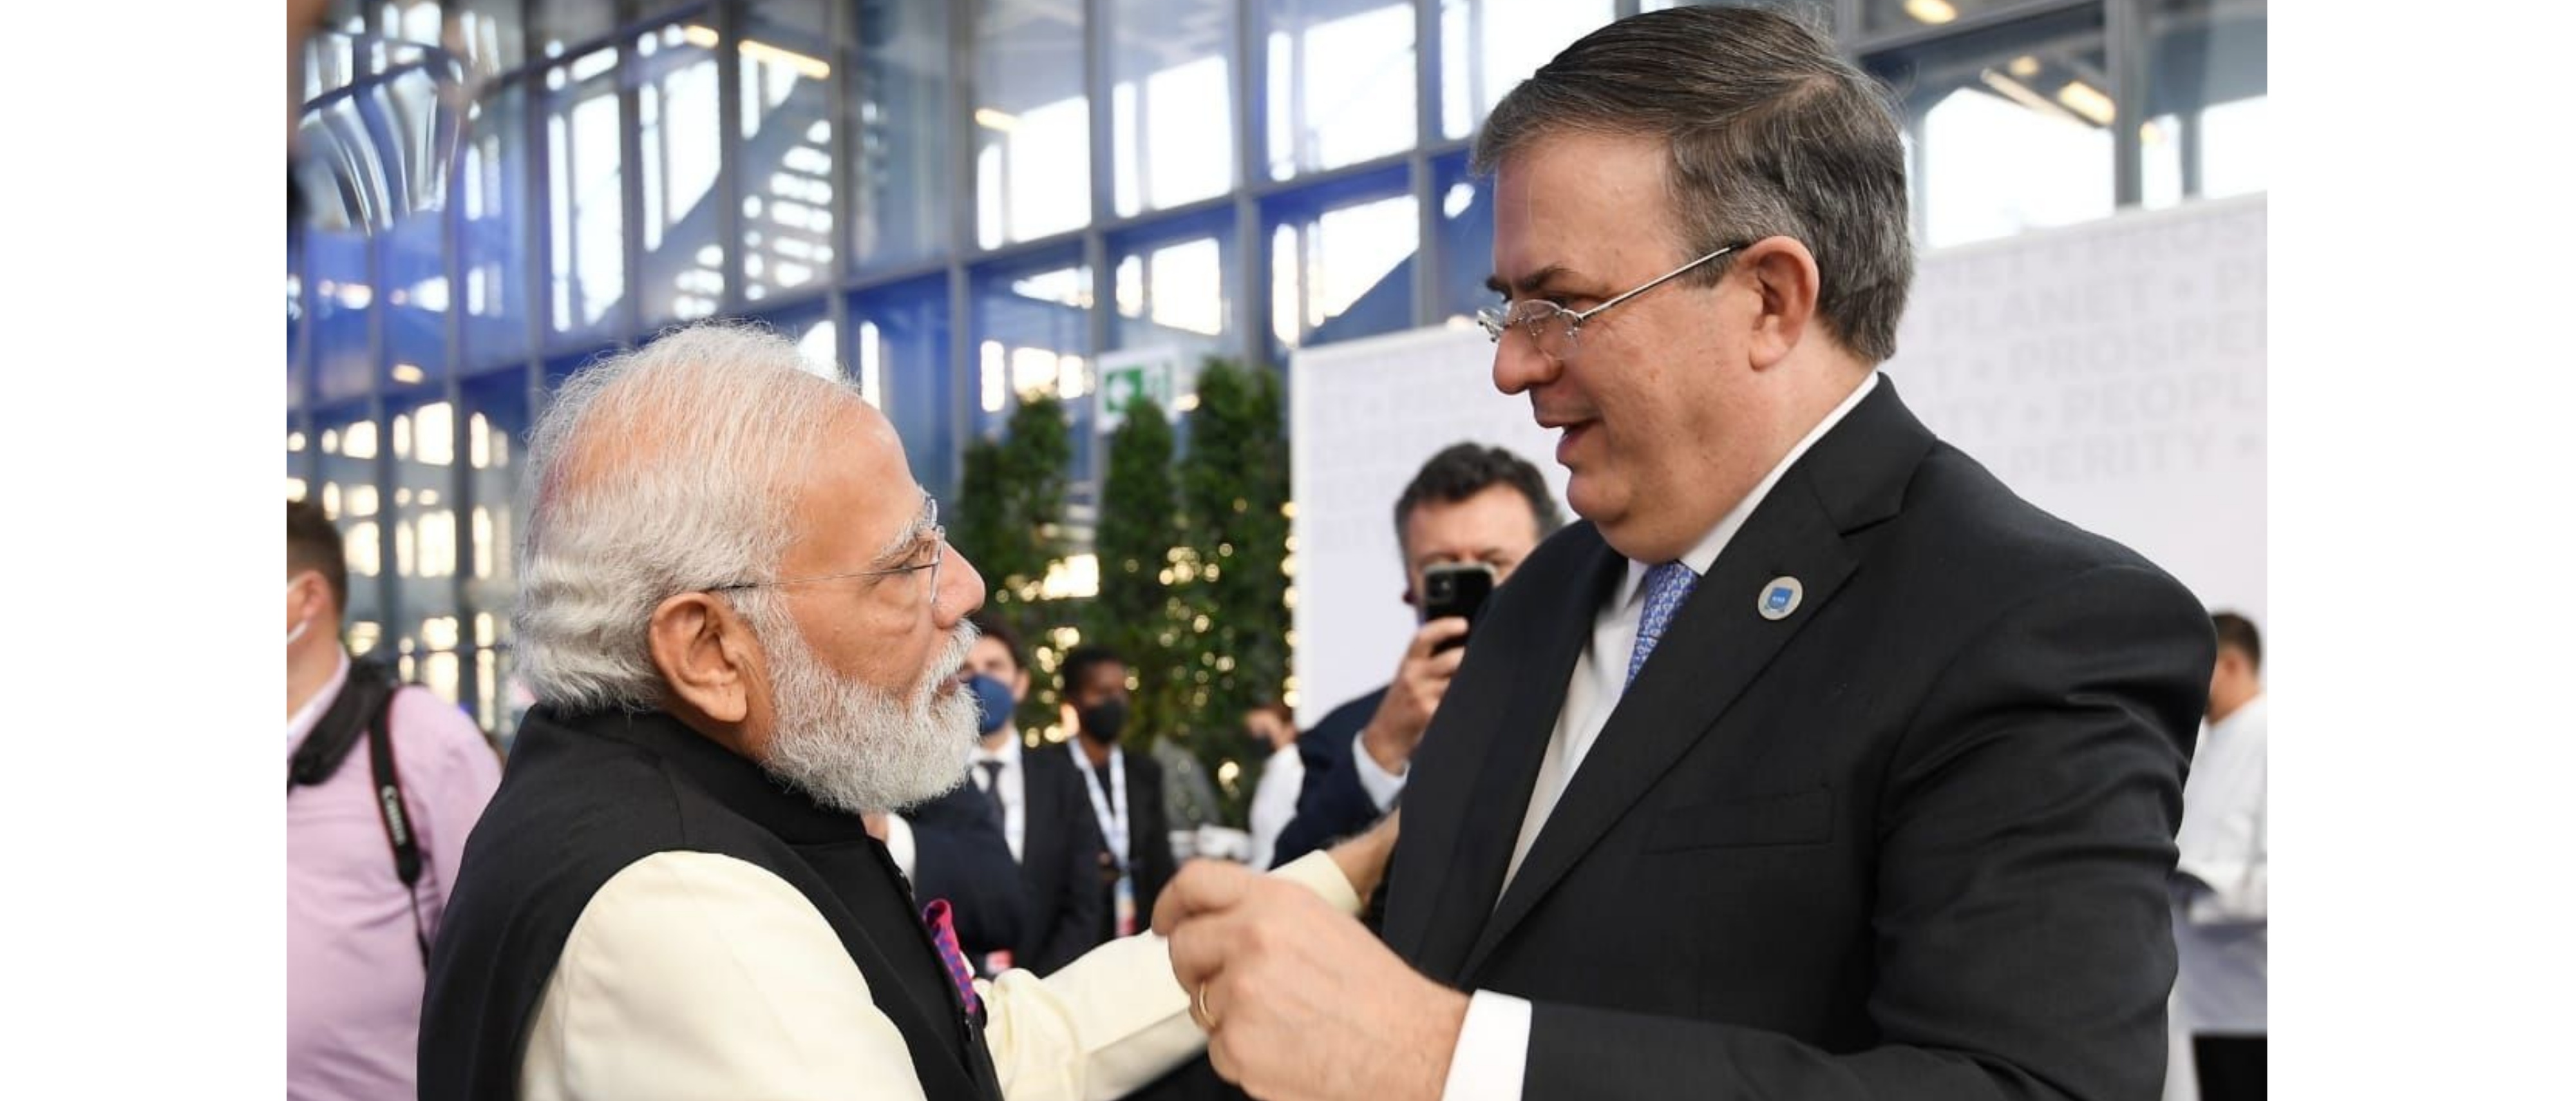  Prime Minister Narendra Modi met Foreign Minister of Mexico H.E. Marcelo Ebrard on the sidelines of G20 summit in Rome.